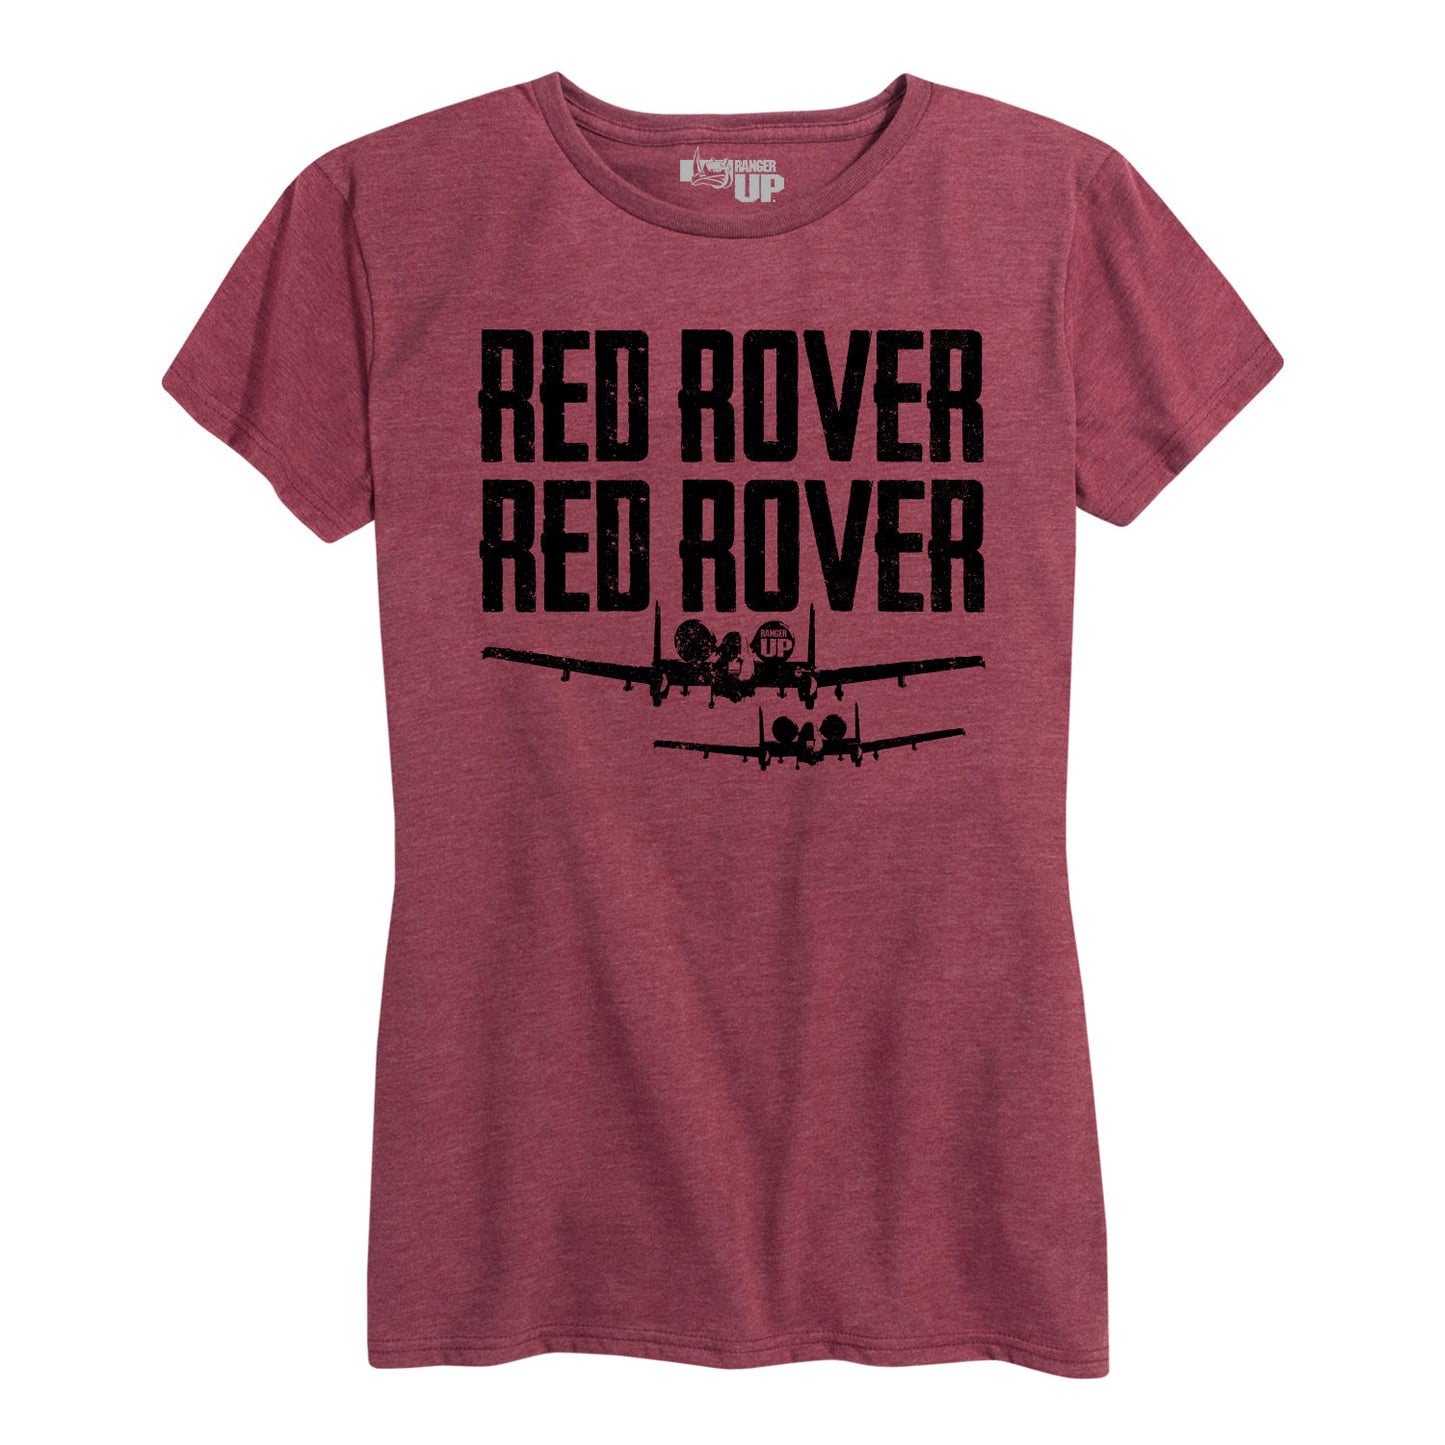 Women's Red Rover A-10 Tee